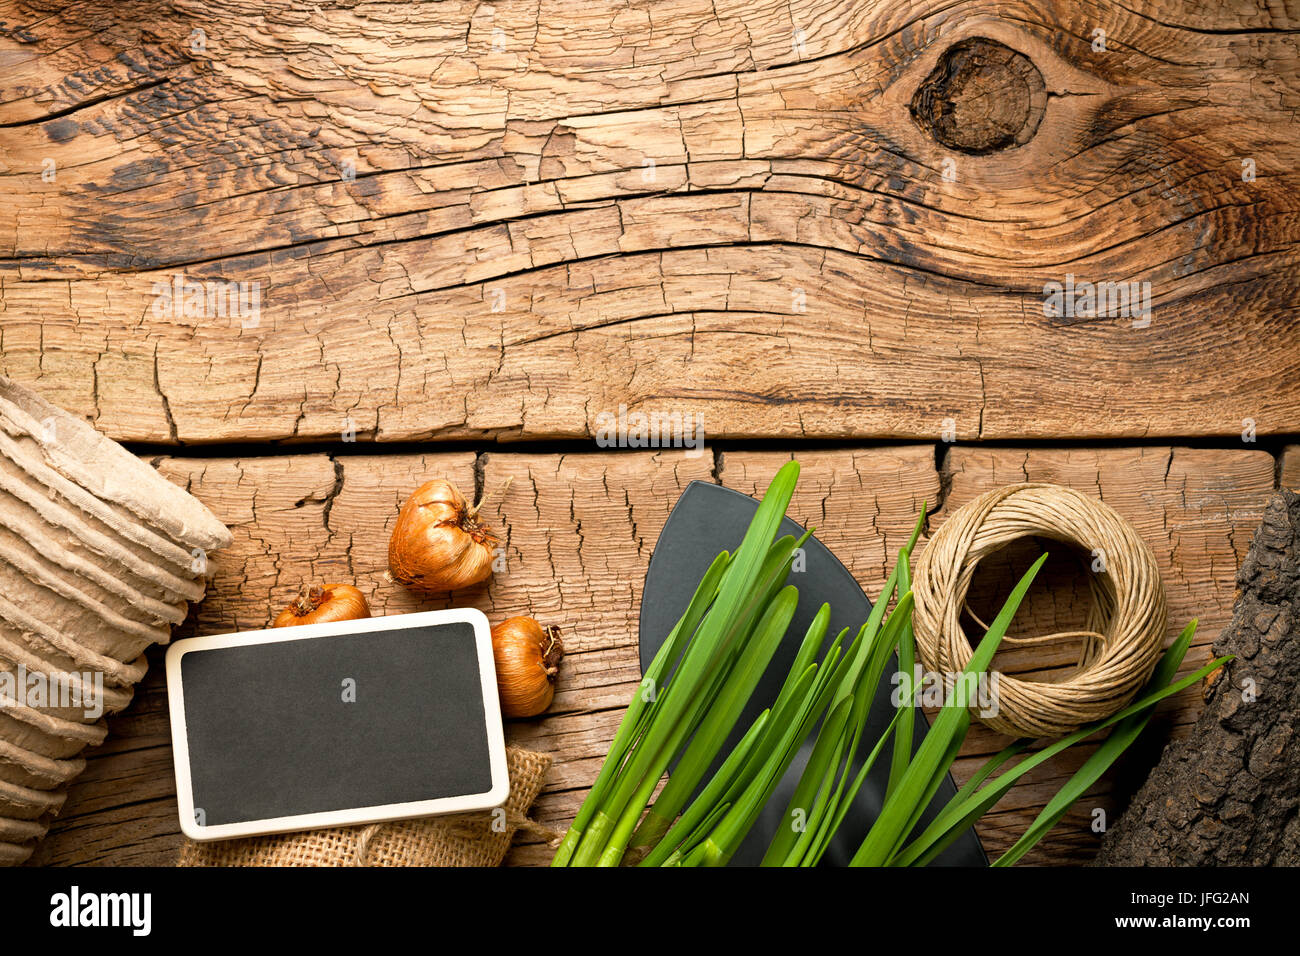 Gardening Tools on Wooden Background Stock Photo